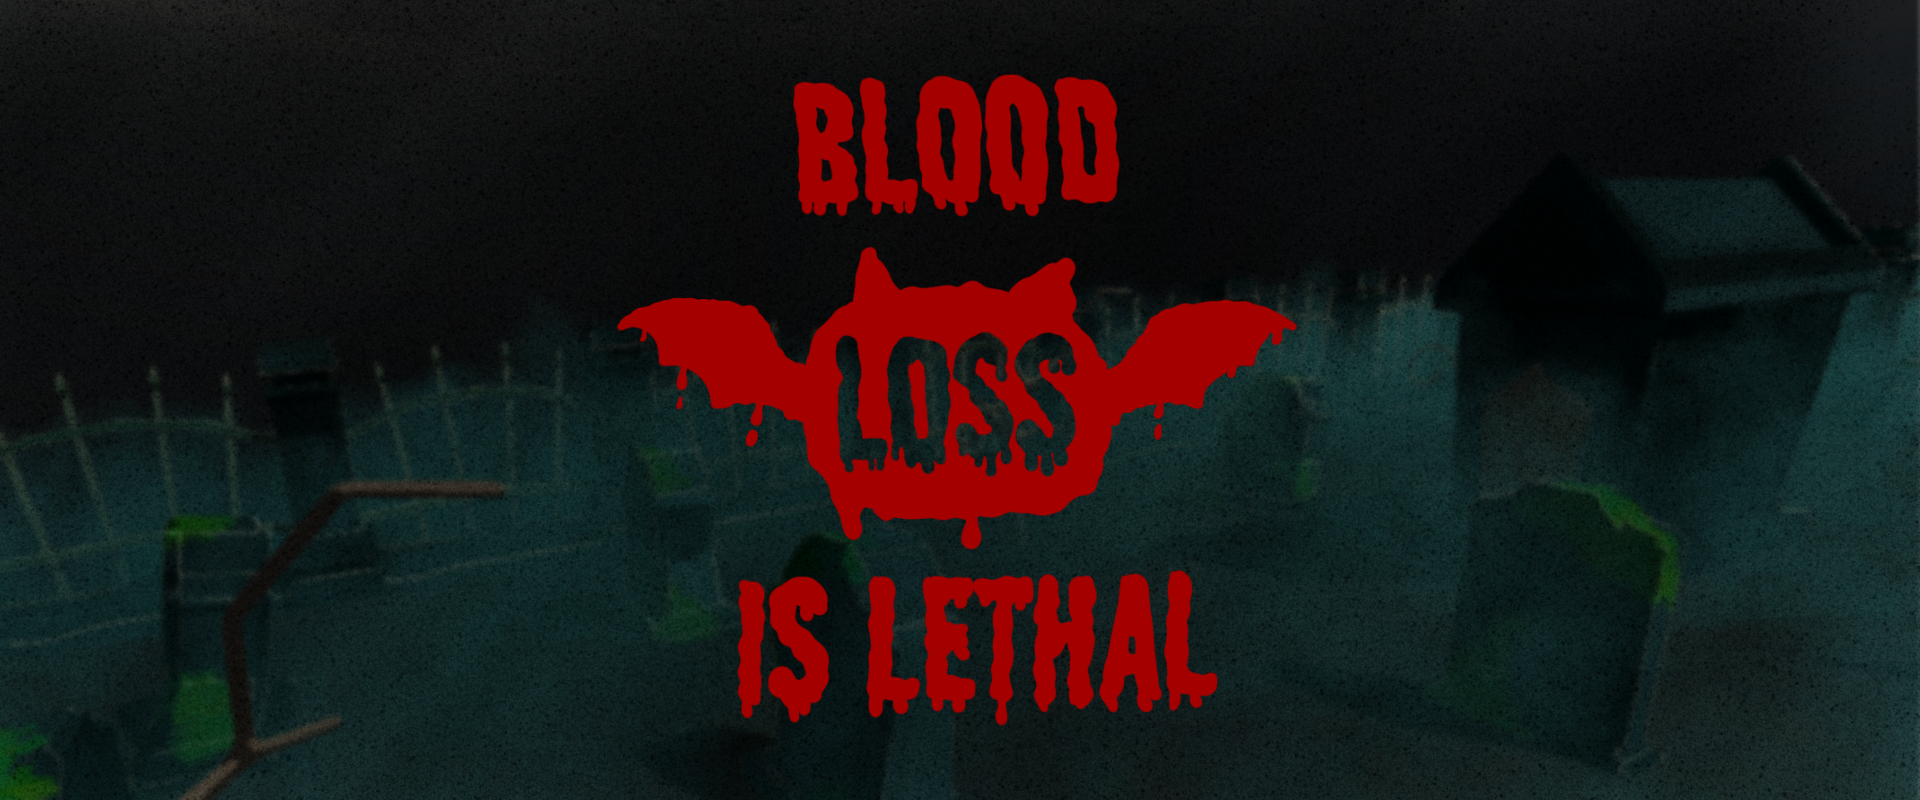 Blood(loss) is lethal